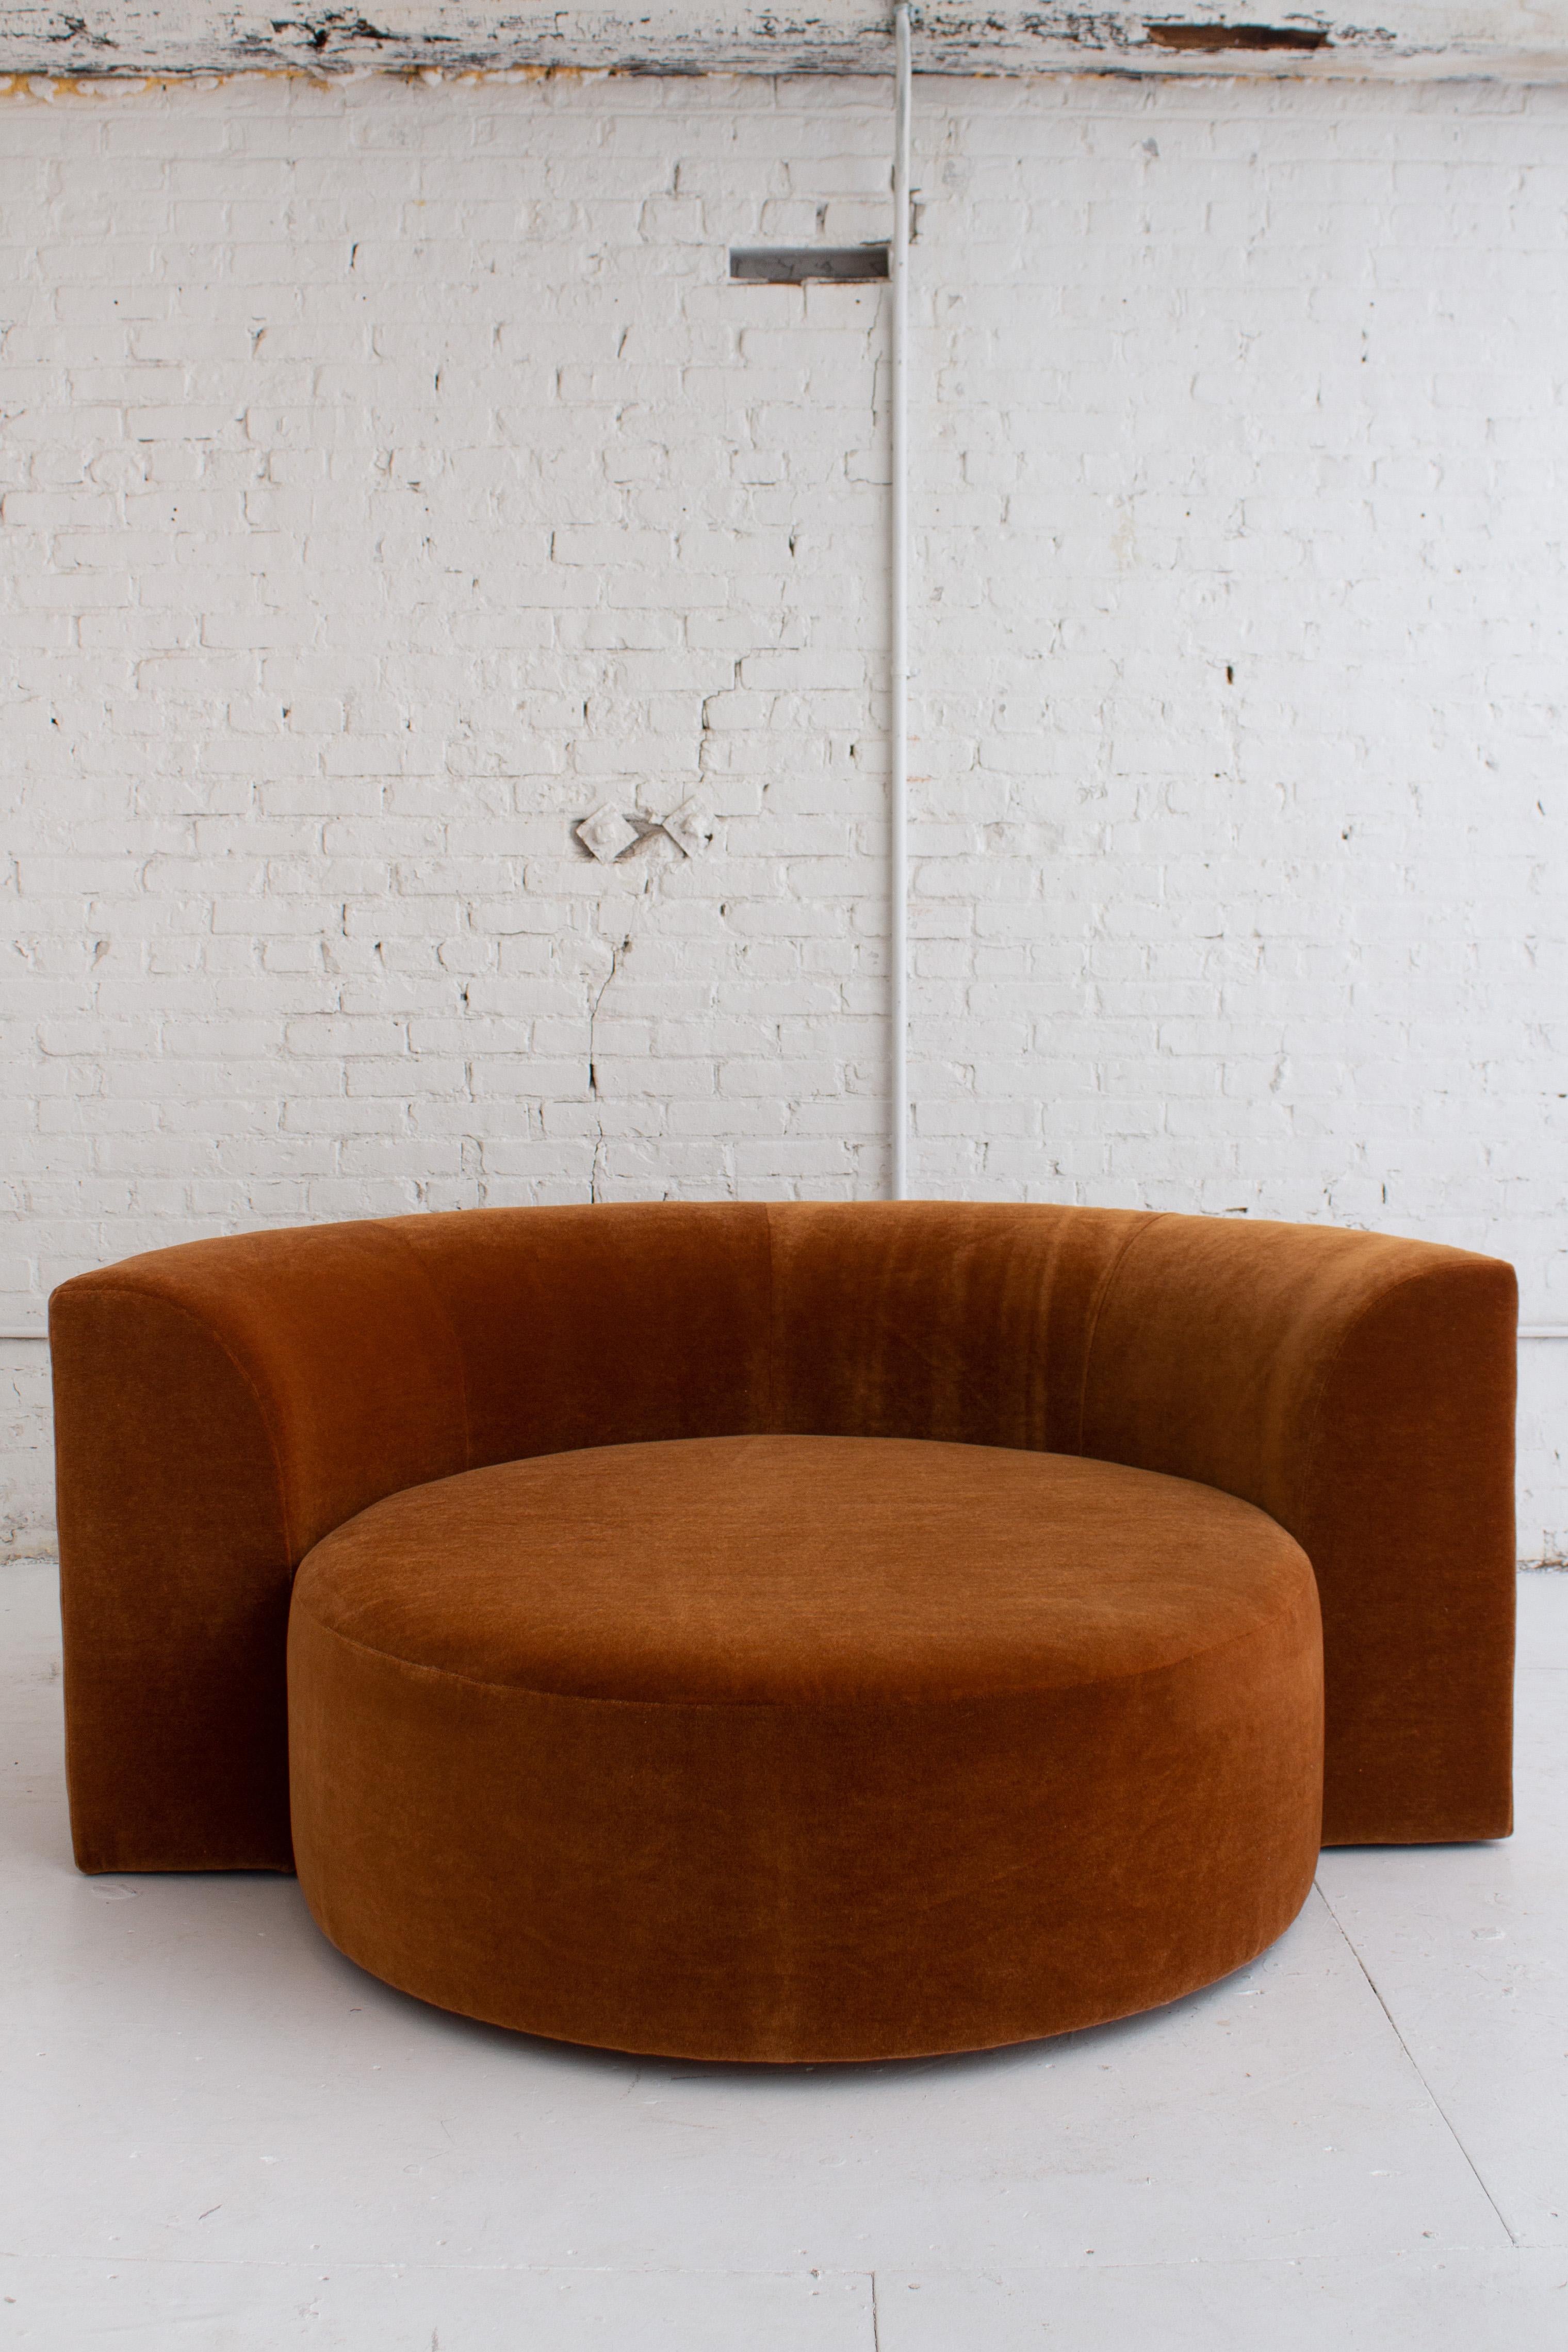 Canadian Circular Chaise Lounge in Mohair by Roger Rougier For Sale